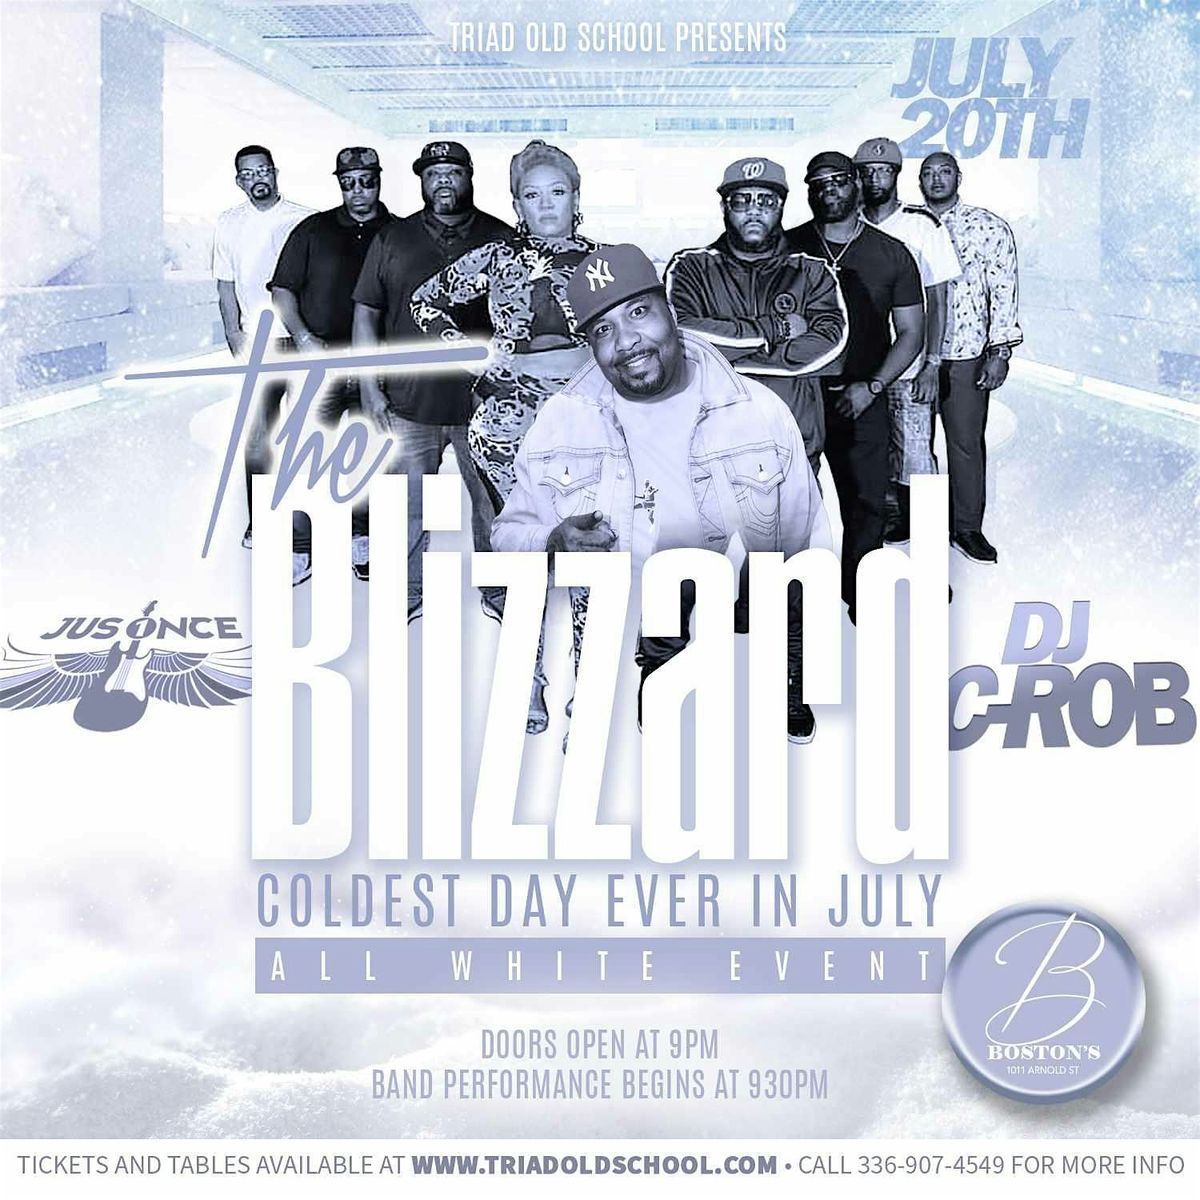 "THE BLIZZARD" - THE 13TH ANNUAL ALL WHITE AFFAIR W\/JUS ONCE & DJ C-ROB